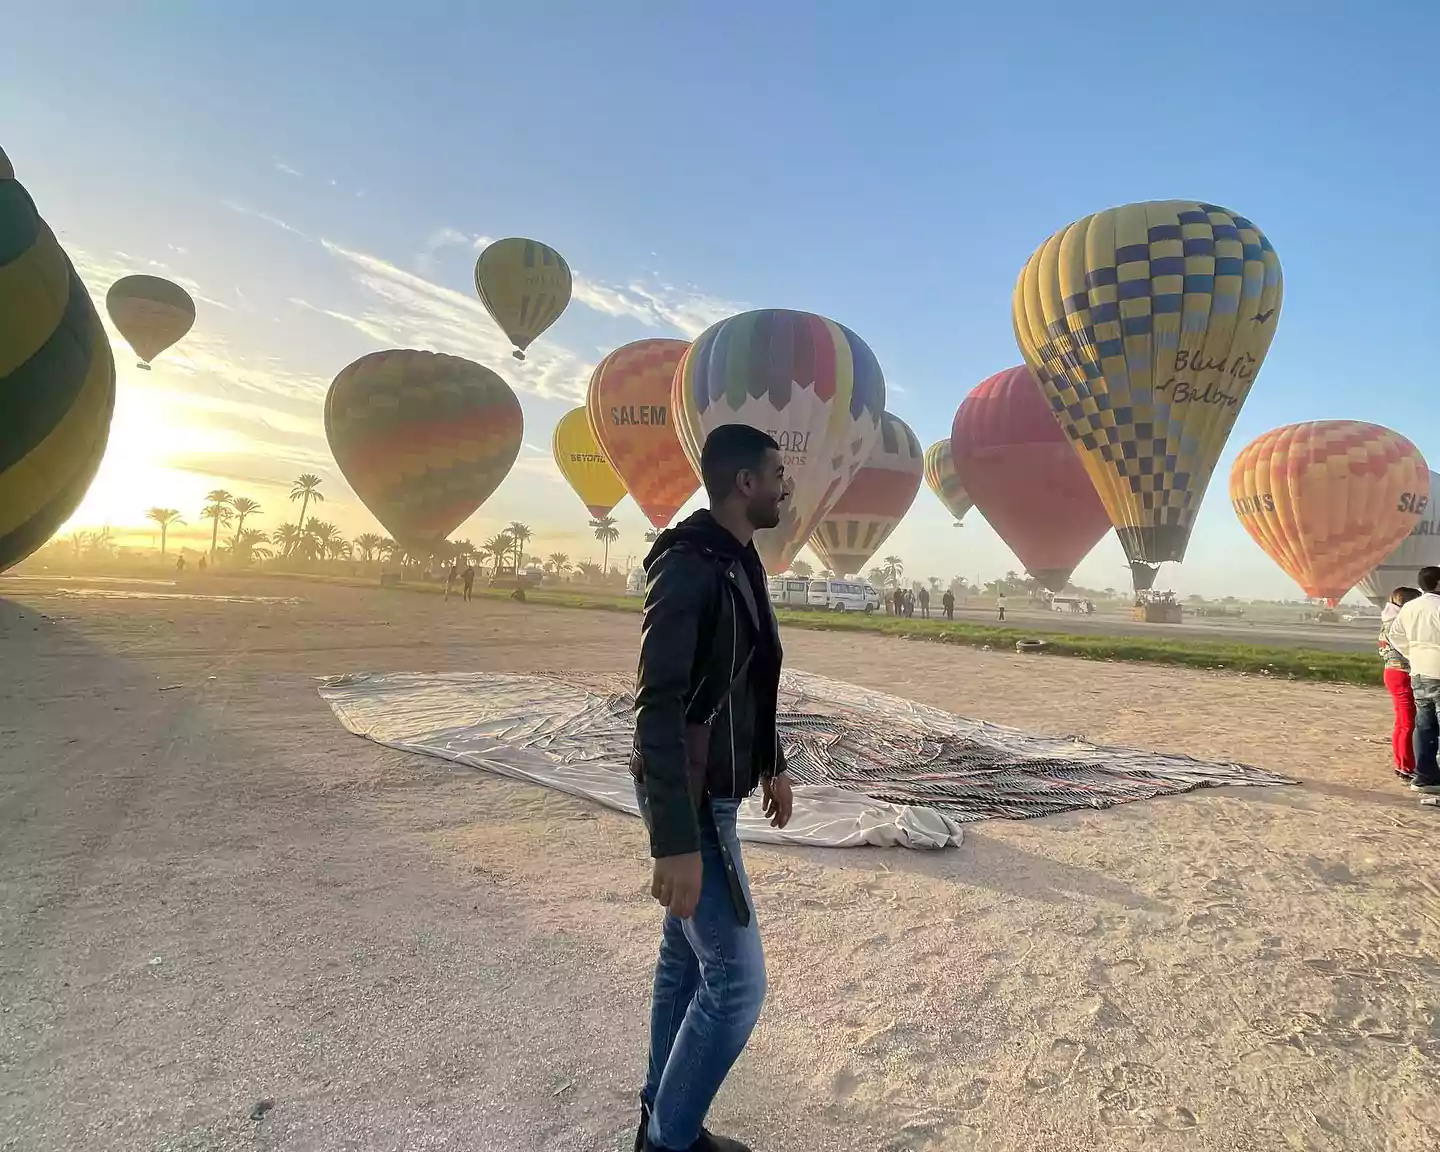 Solo traveler who enjoyed the hot air balloon ride in Luxor with iEgypt tours and travels